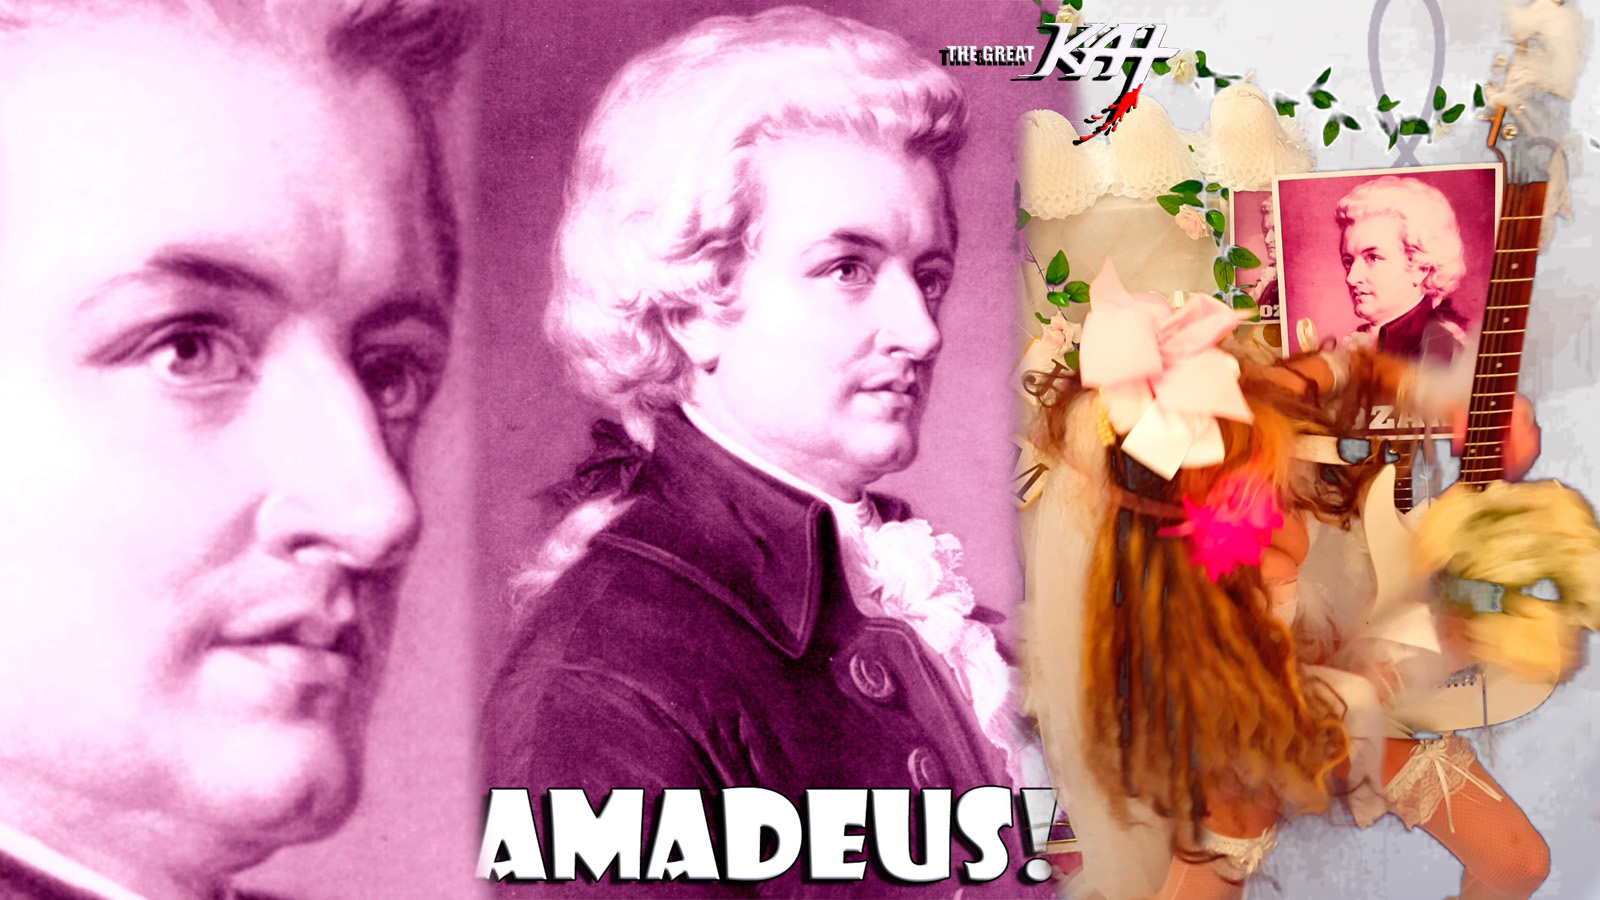 AMADEUS! MOZART'S THE MARRIAGE OF FIGARO OVERTURE by THE GREAT KAT!